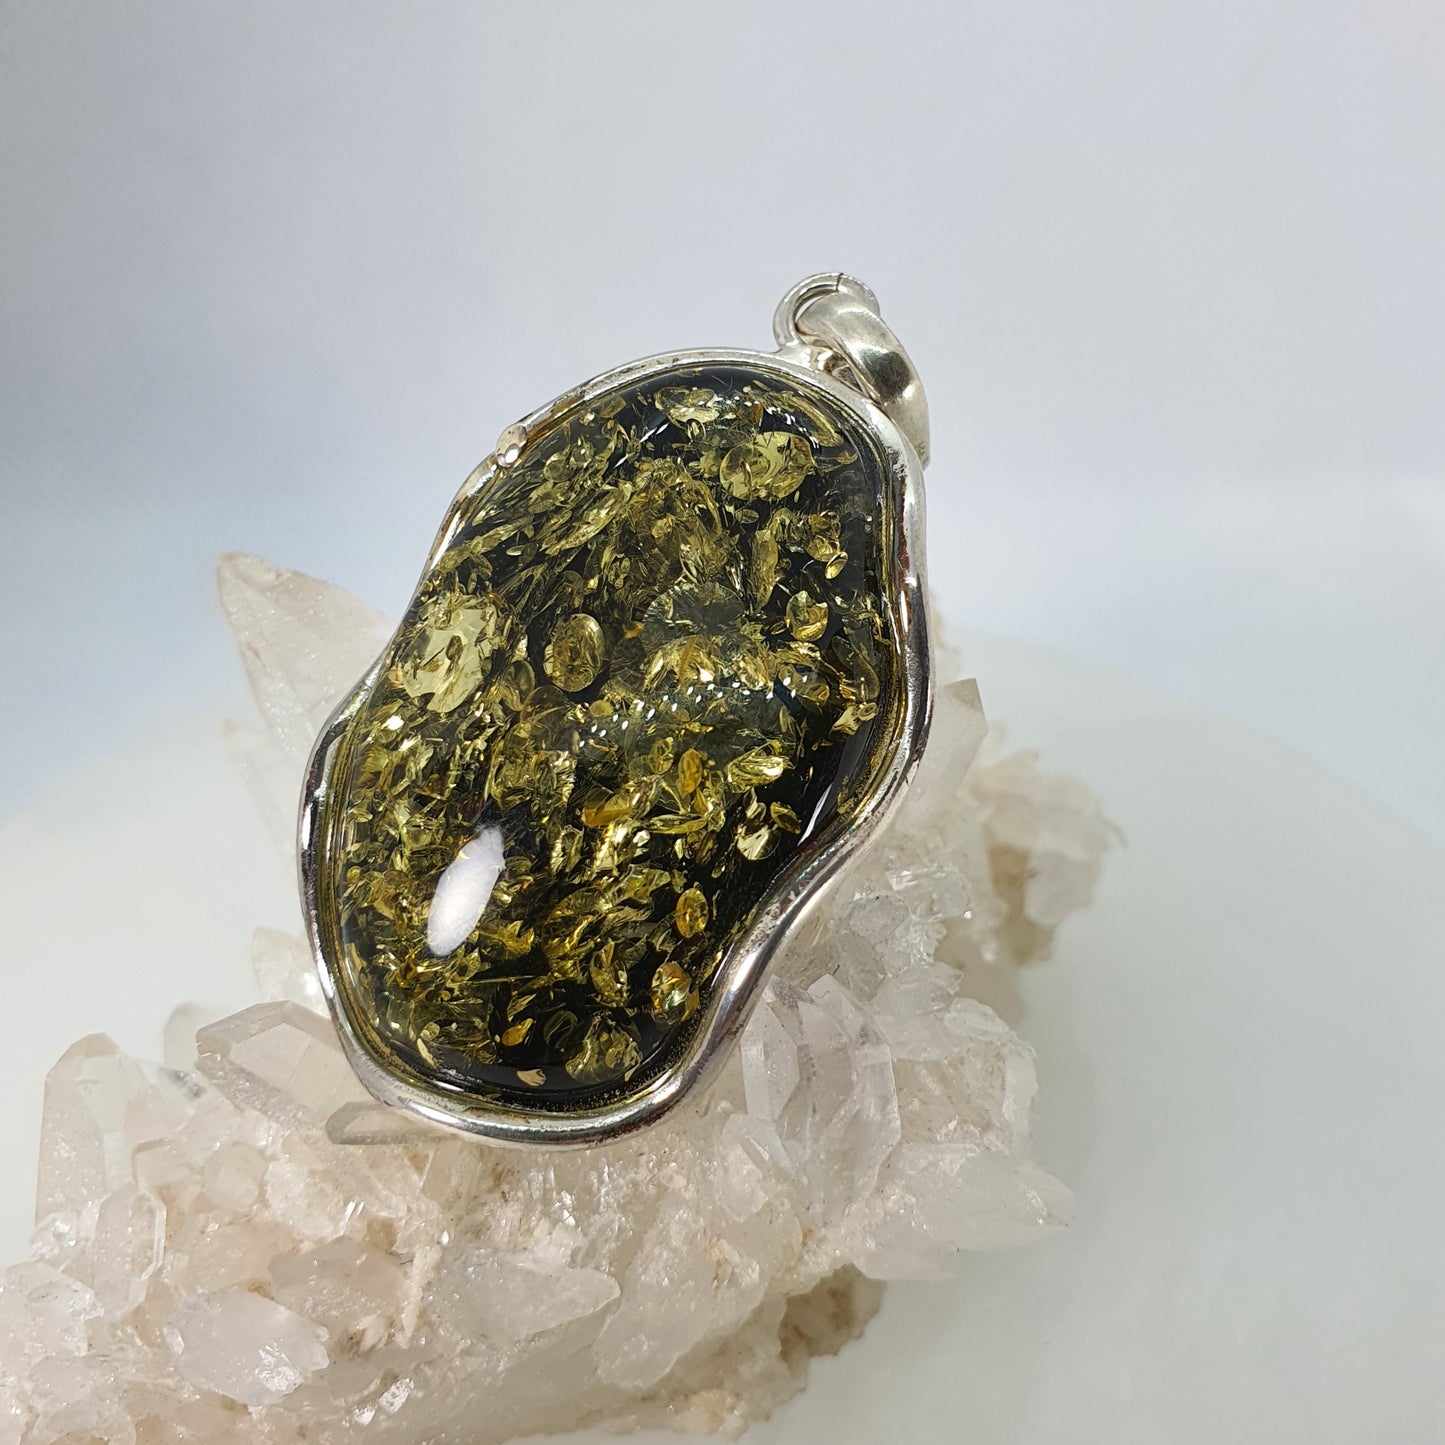 Crystals - Green Amber Pendant - Sterling Silver